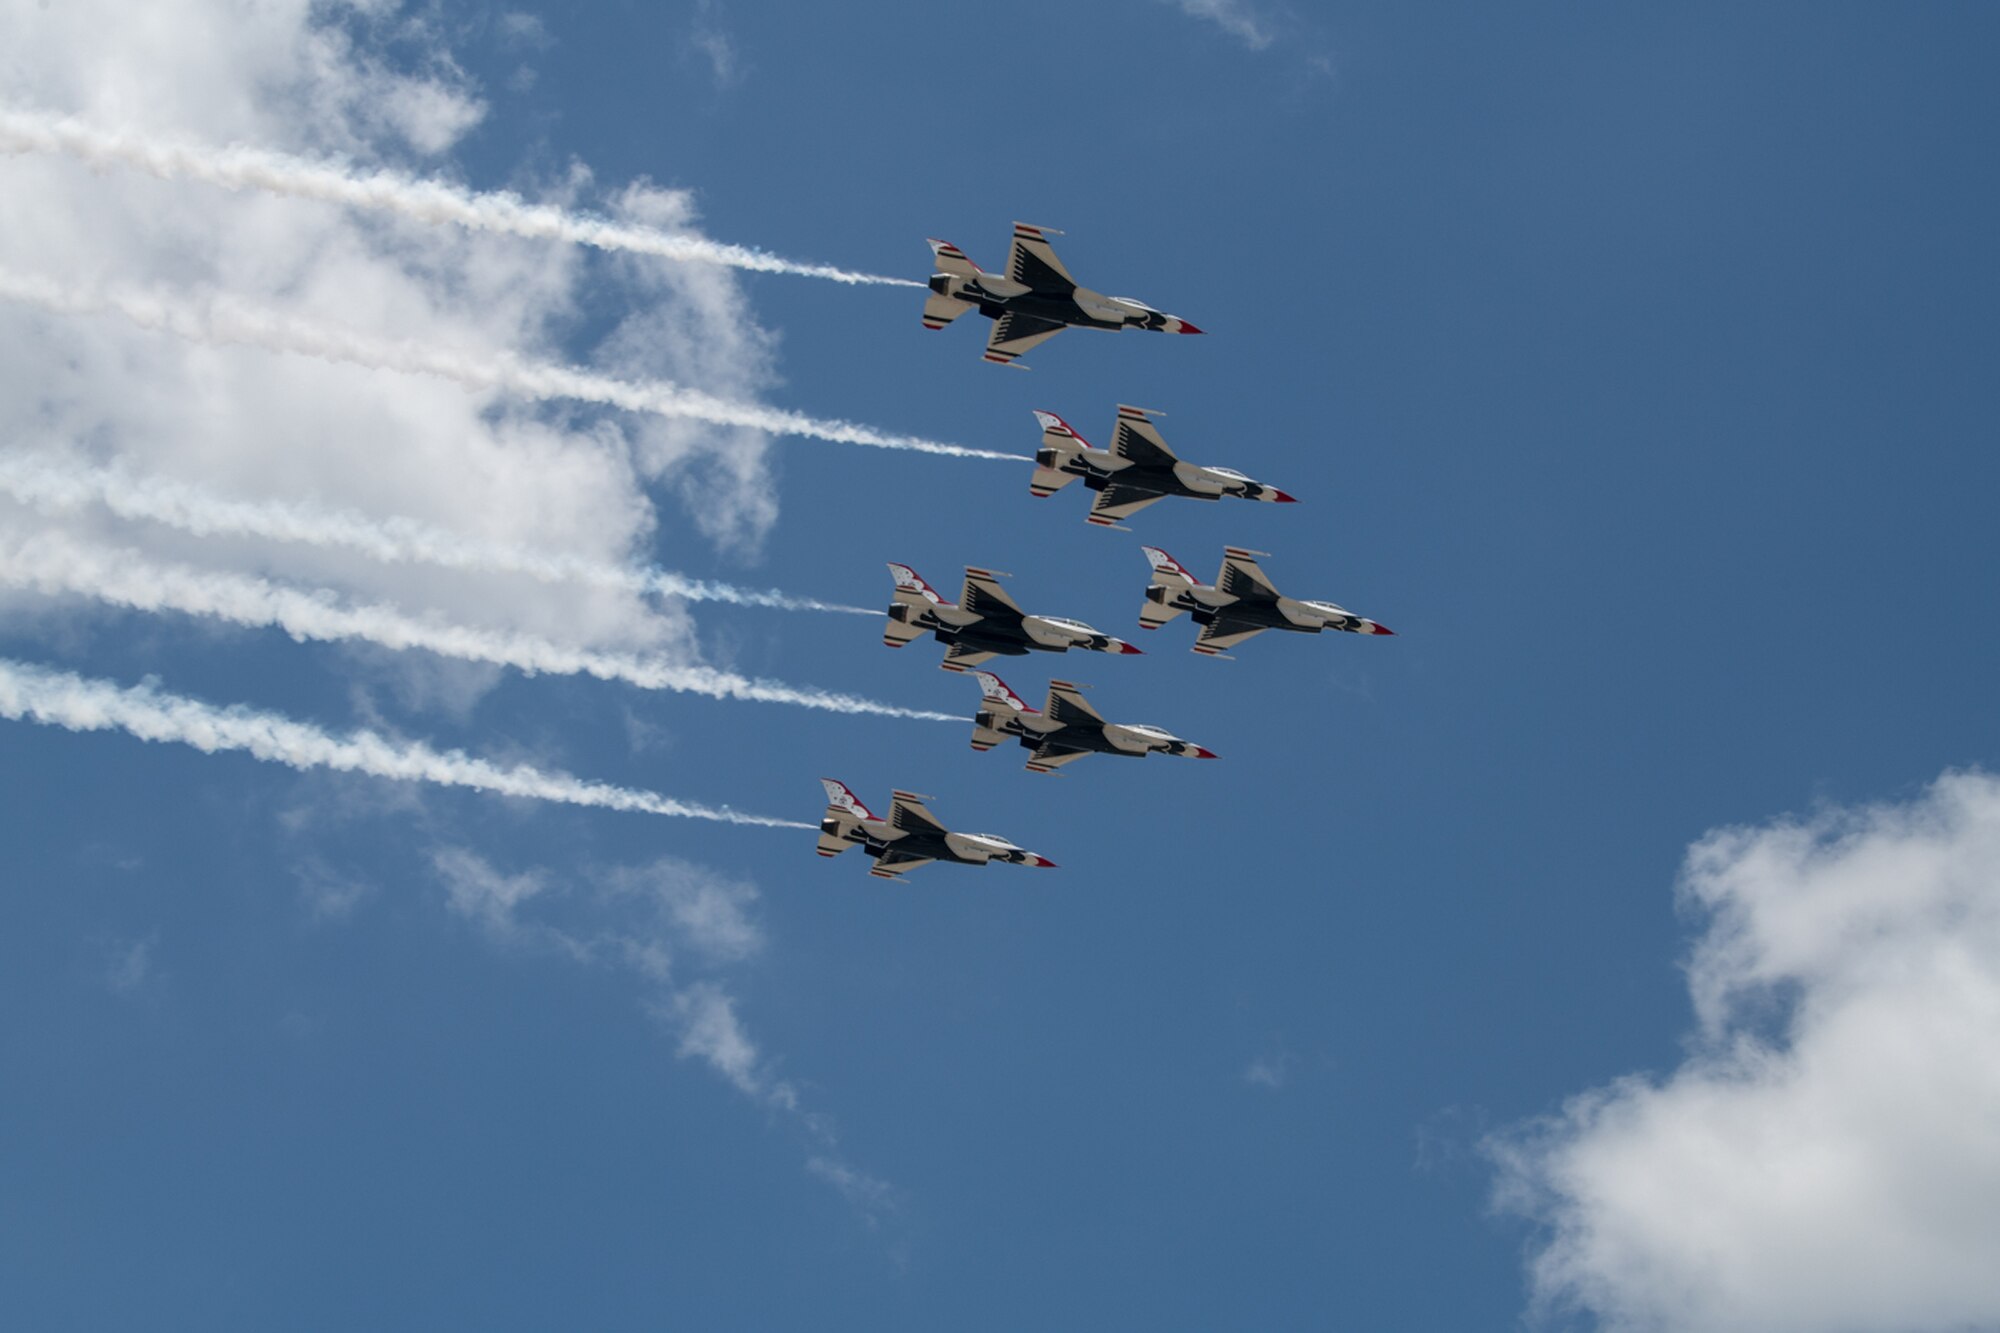 The United States Air Force Air Demonstration Squadron “Thunderbirds” fly over the city of San Antonio May 13 Texas in support of Operation America Strong.